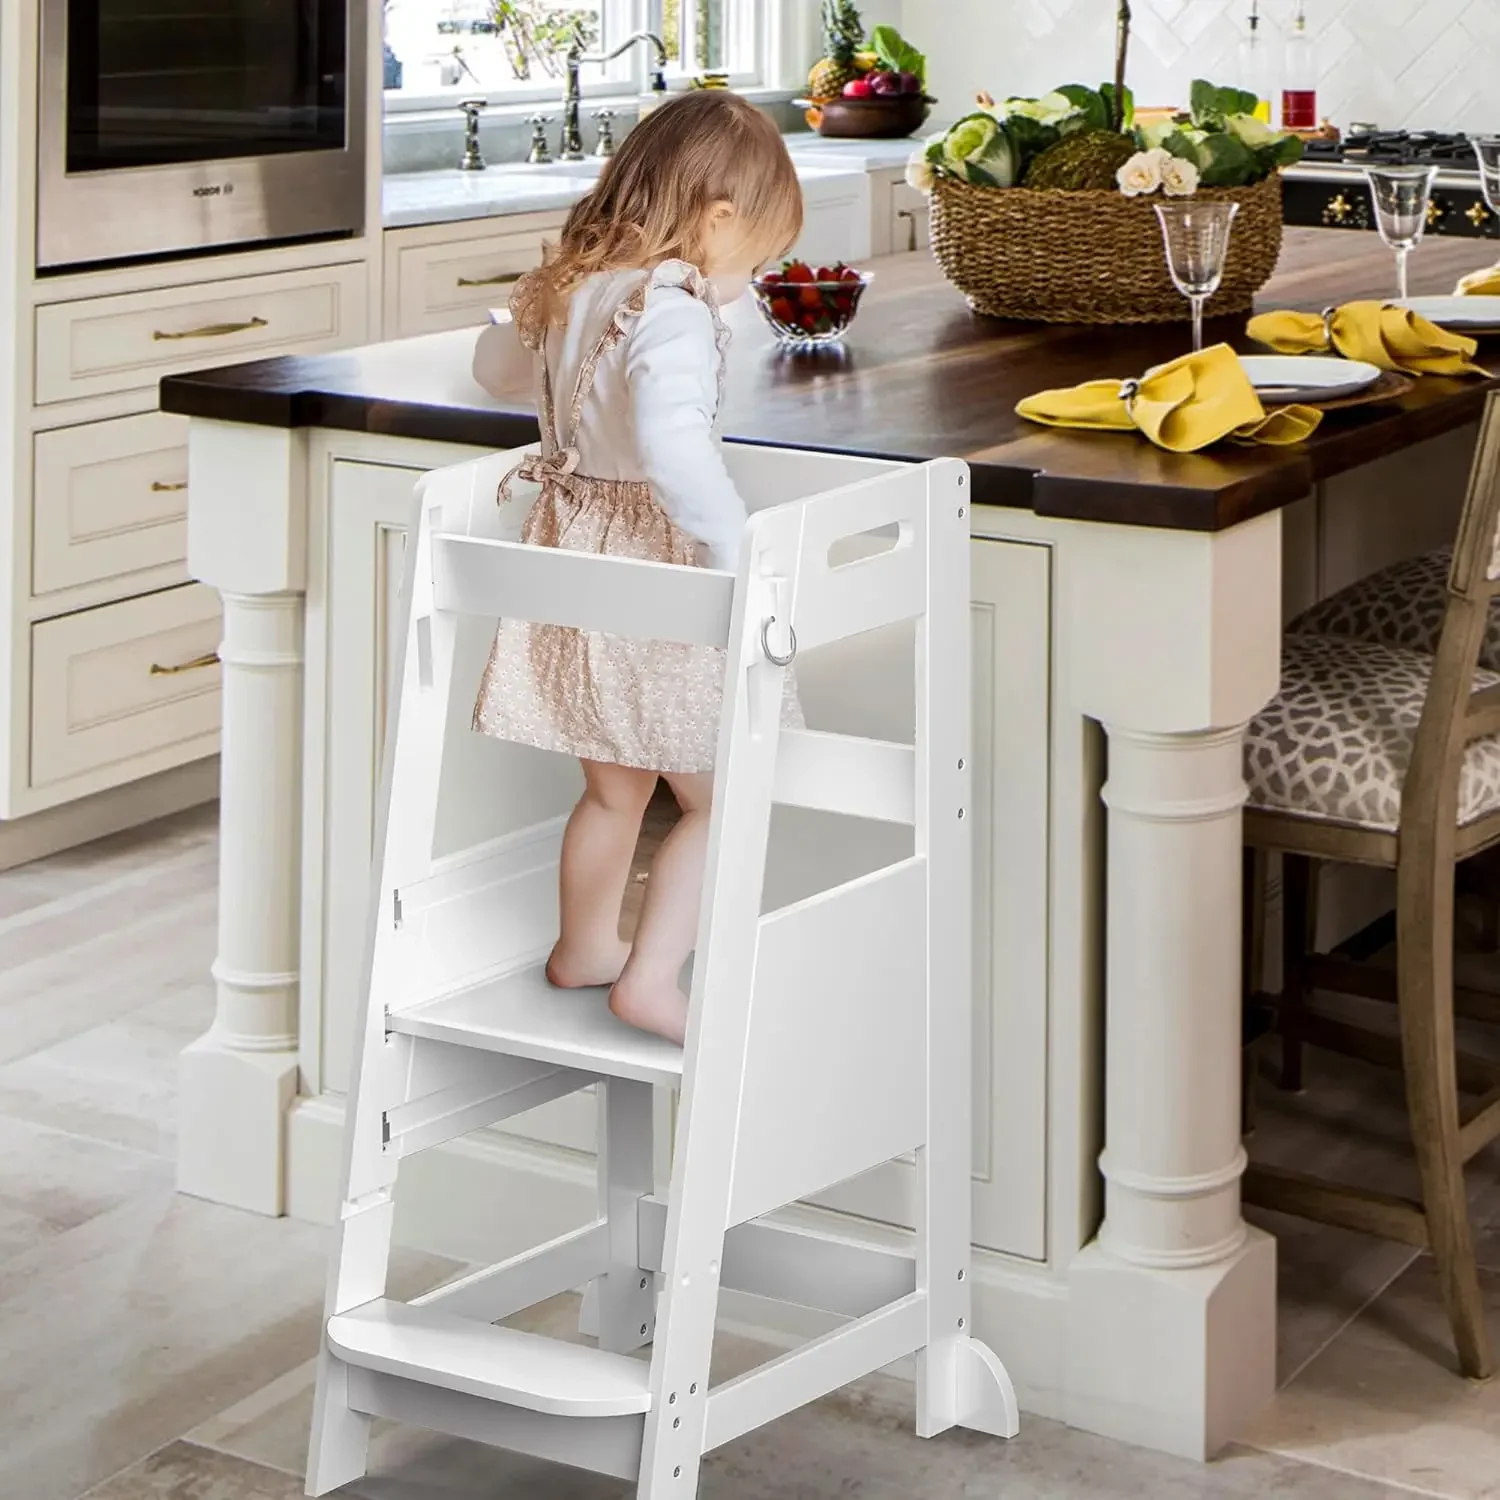 

Bamboo Toddler Kitchen Step Stool Helper Standing Tower Height Adjustable with Anti-Slip Protection